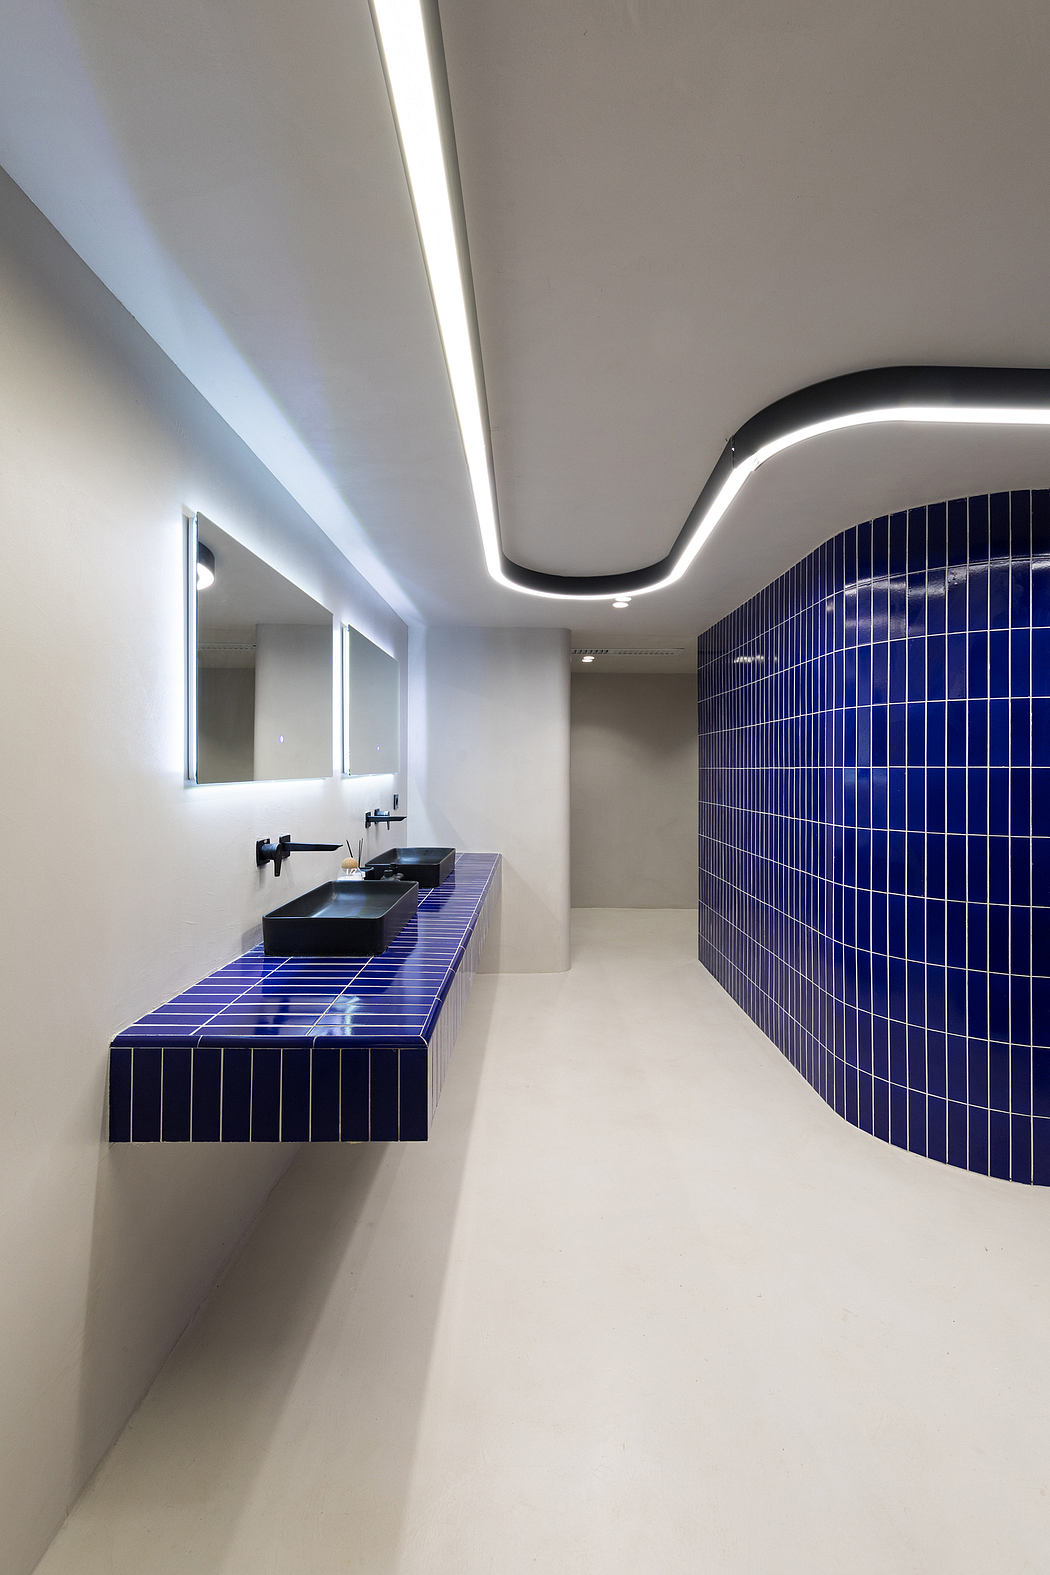 A modern bathroom with minimalist design, featuring a blue tiled wall and floating vanity.